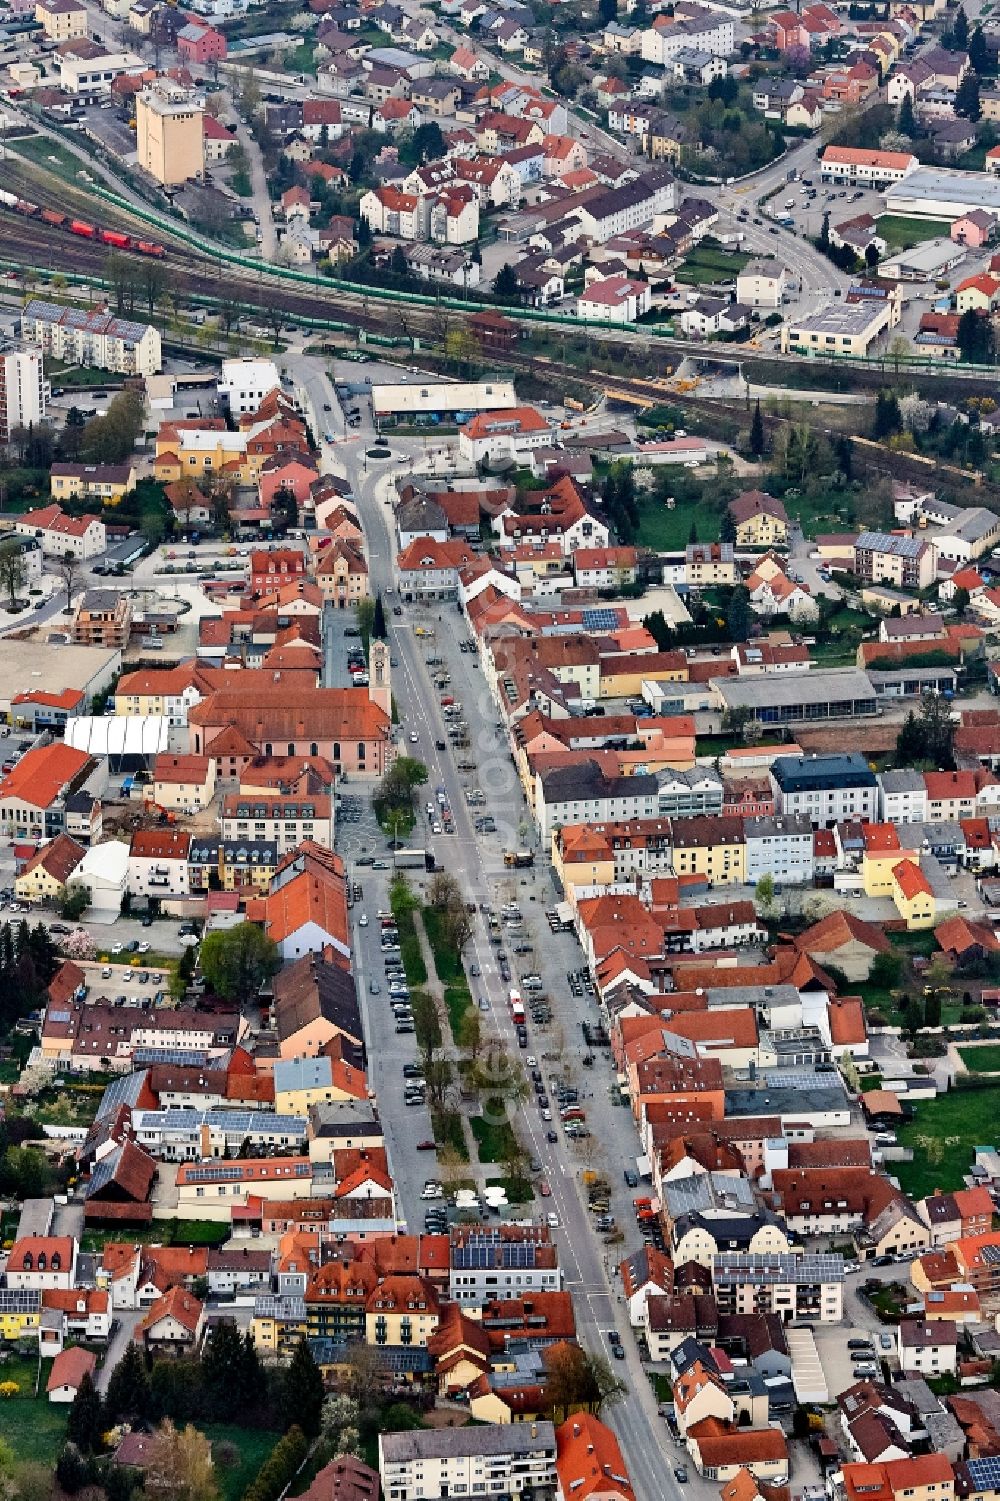 Plattling from above - Old town area and downtown center around the Ludwigplatz in Plattling in the state of Bavaria, Germany, and the church of St. Magdalena